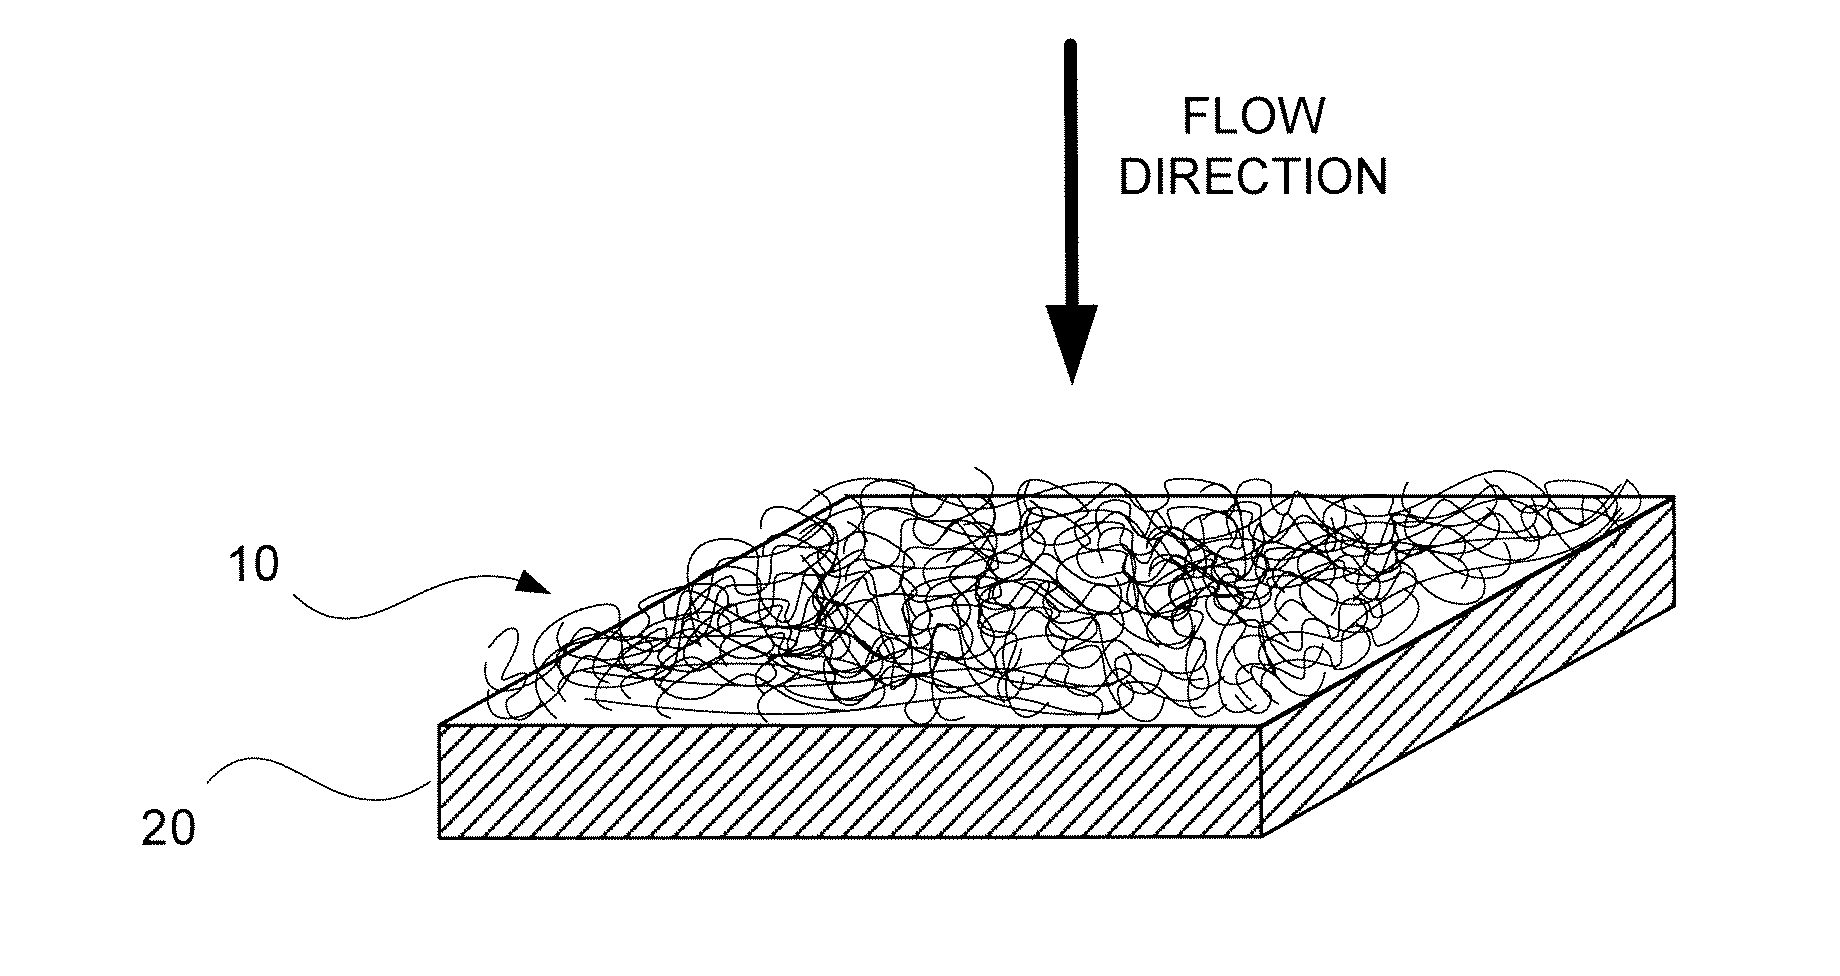 Multi-Layer, Fluid Transmissive Fiber Structures Containing Nanofibers and a Method of Manufacturing Such Structures